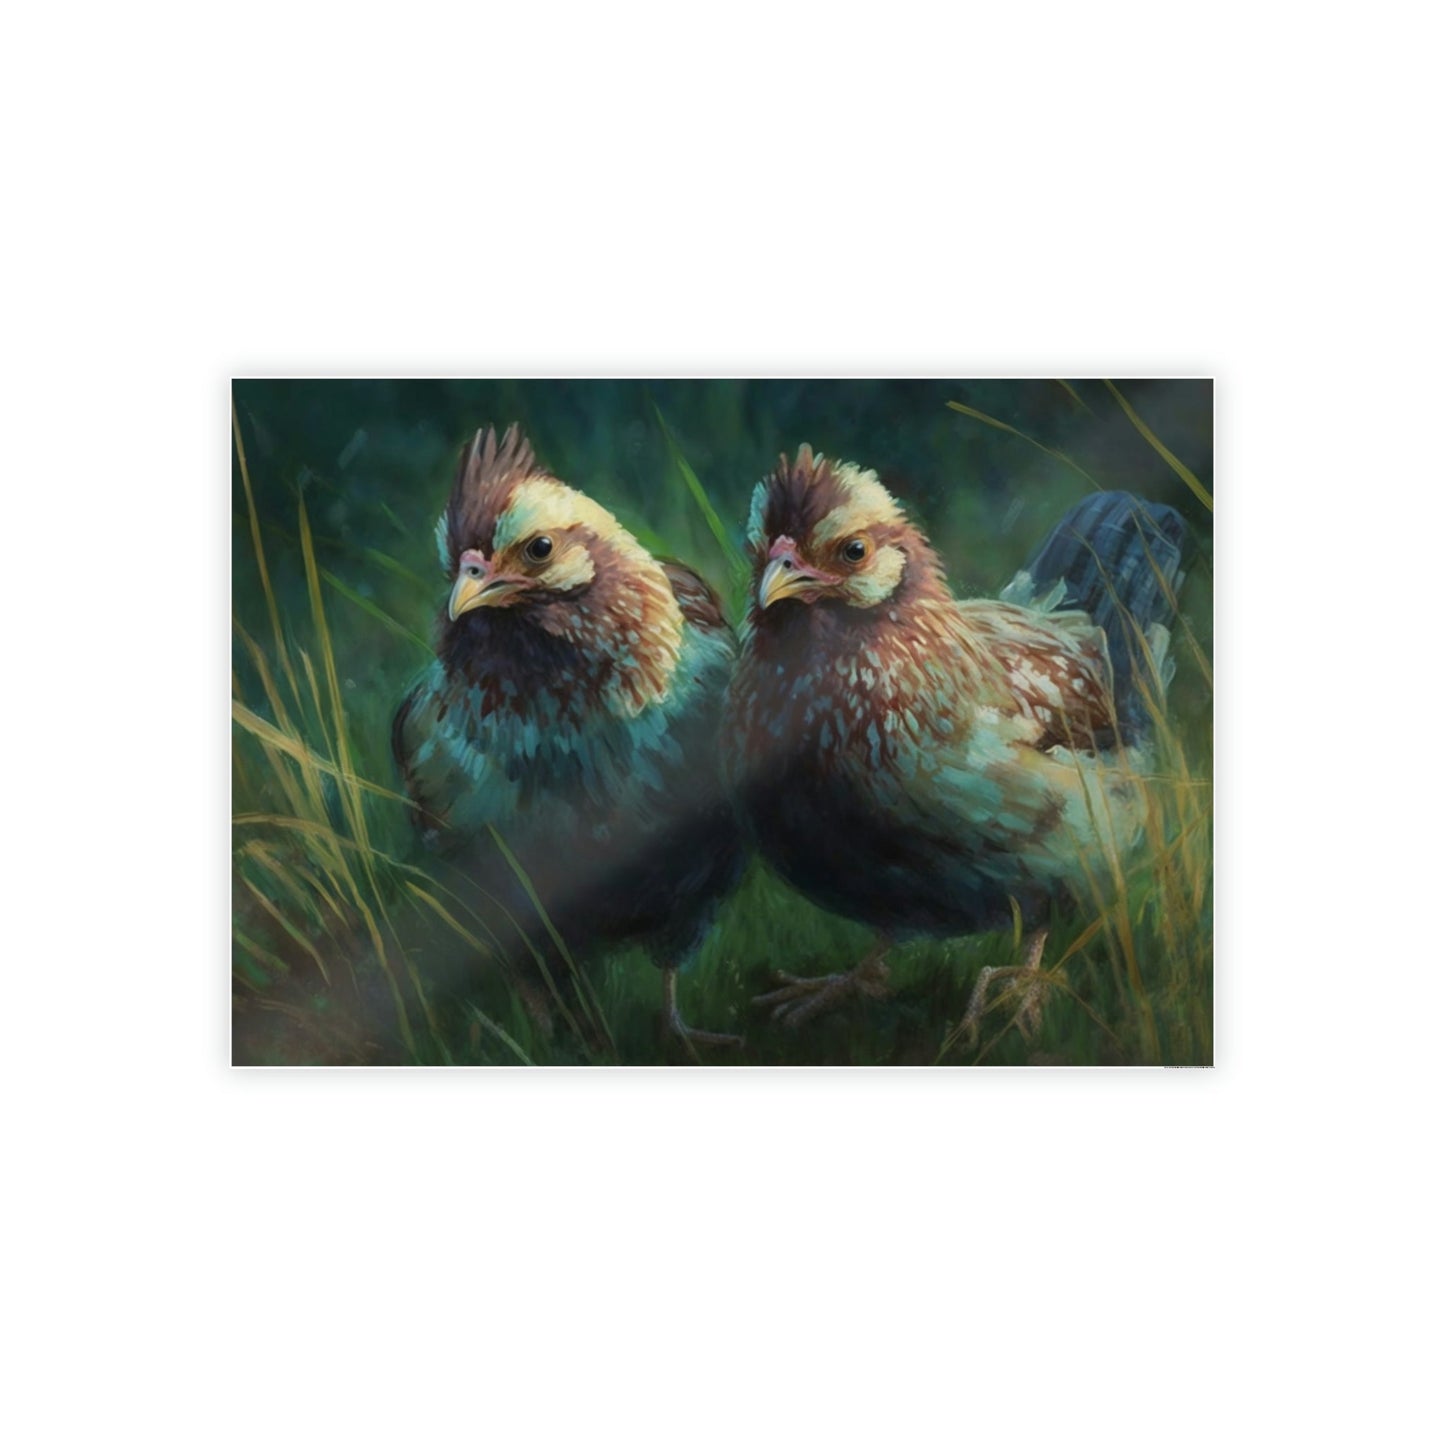 Fluffy Chickens: Canvas Art with Soft and Adorable Baby Chicks